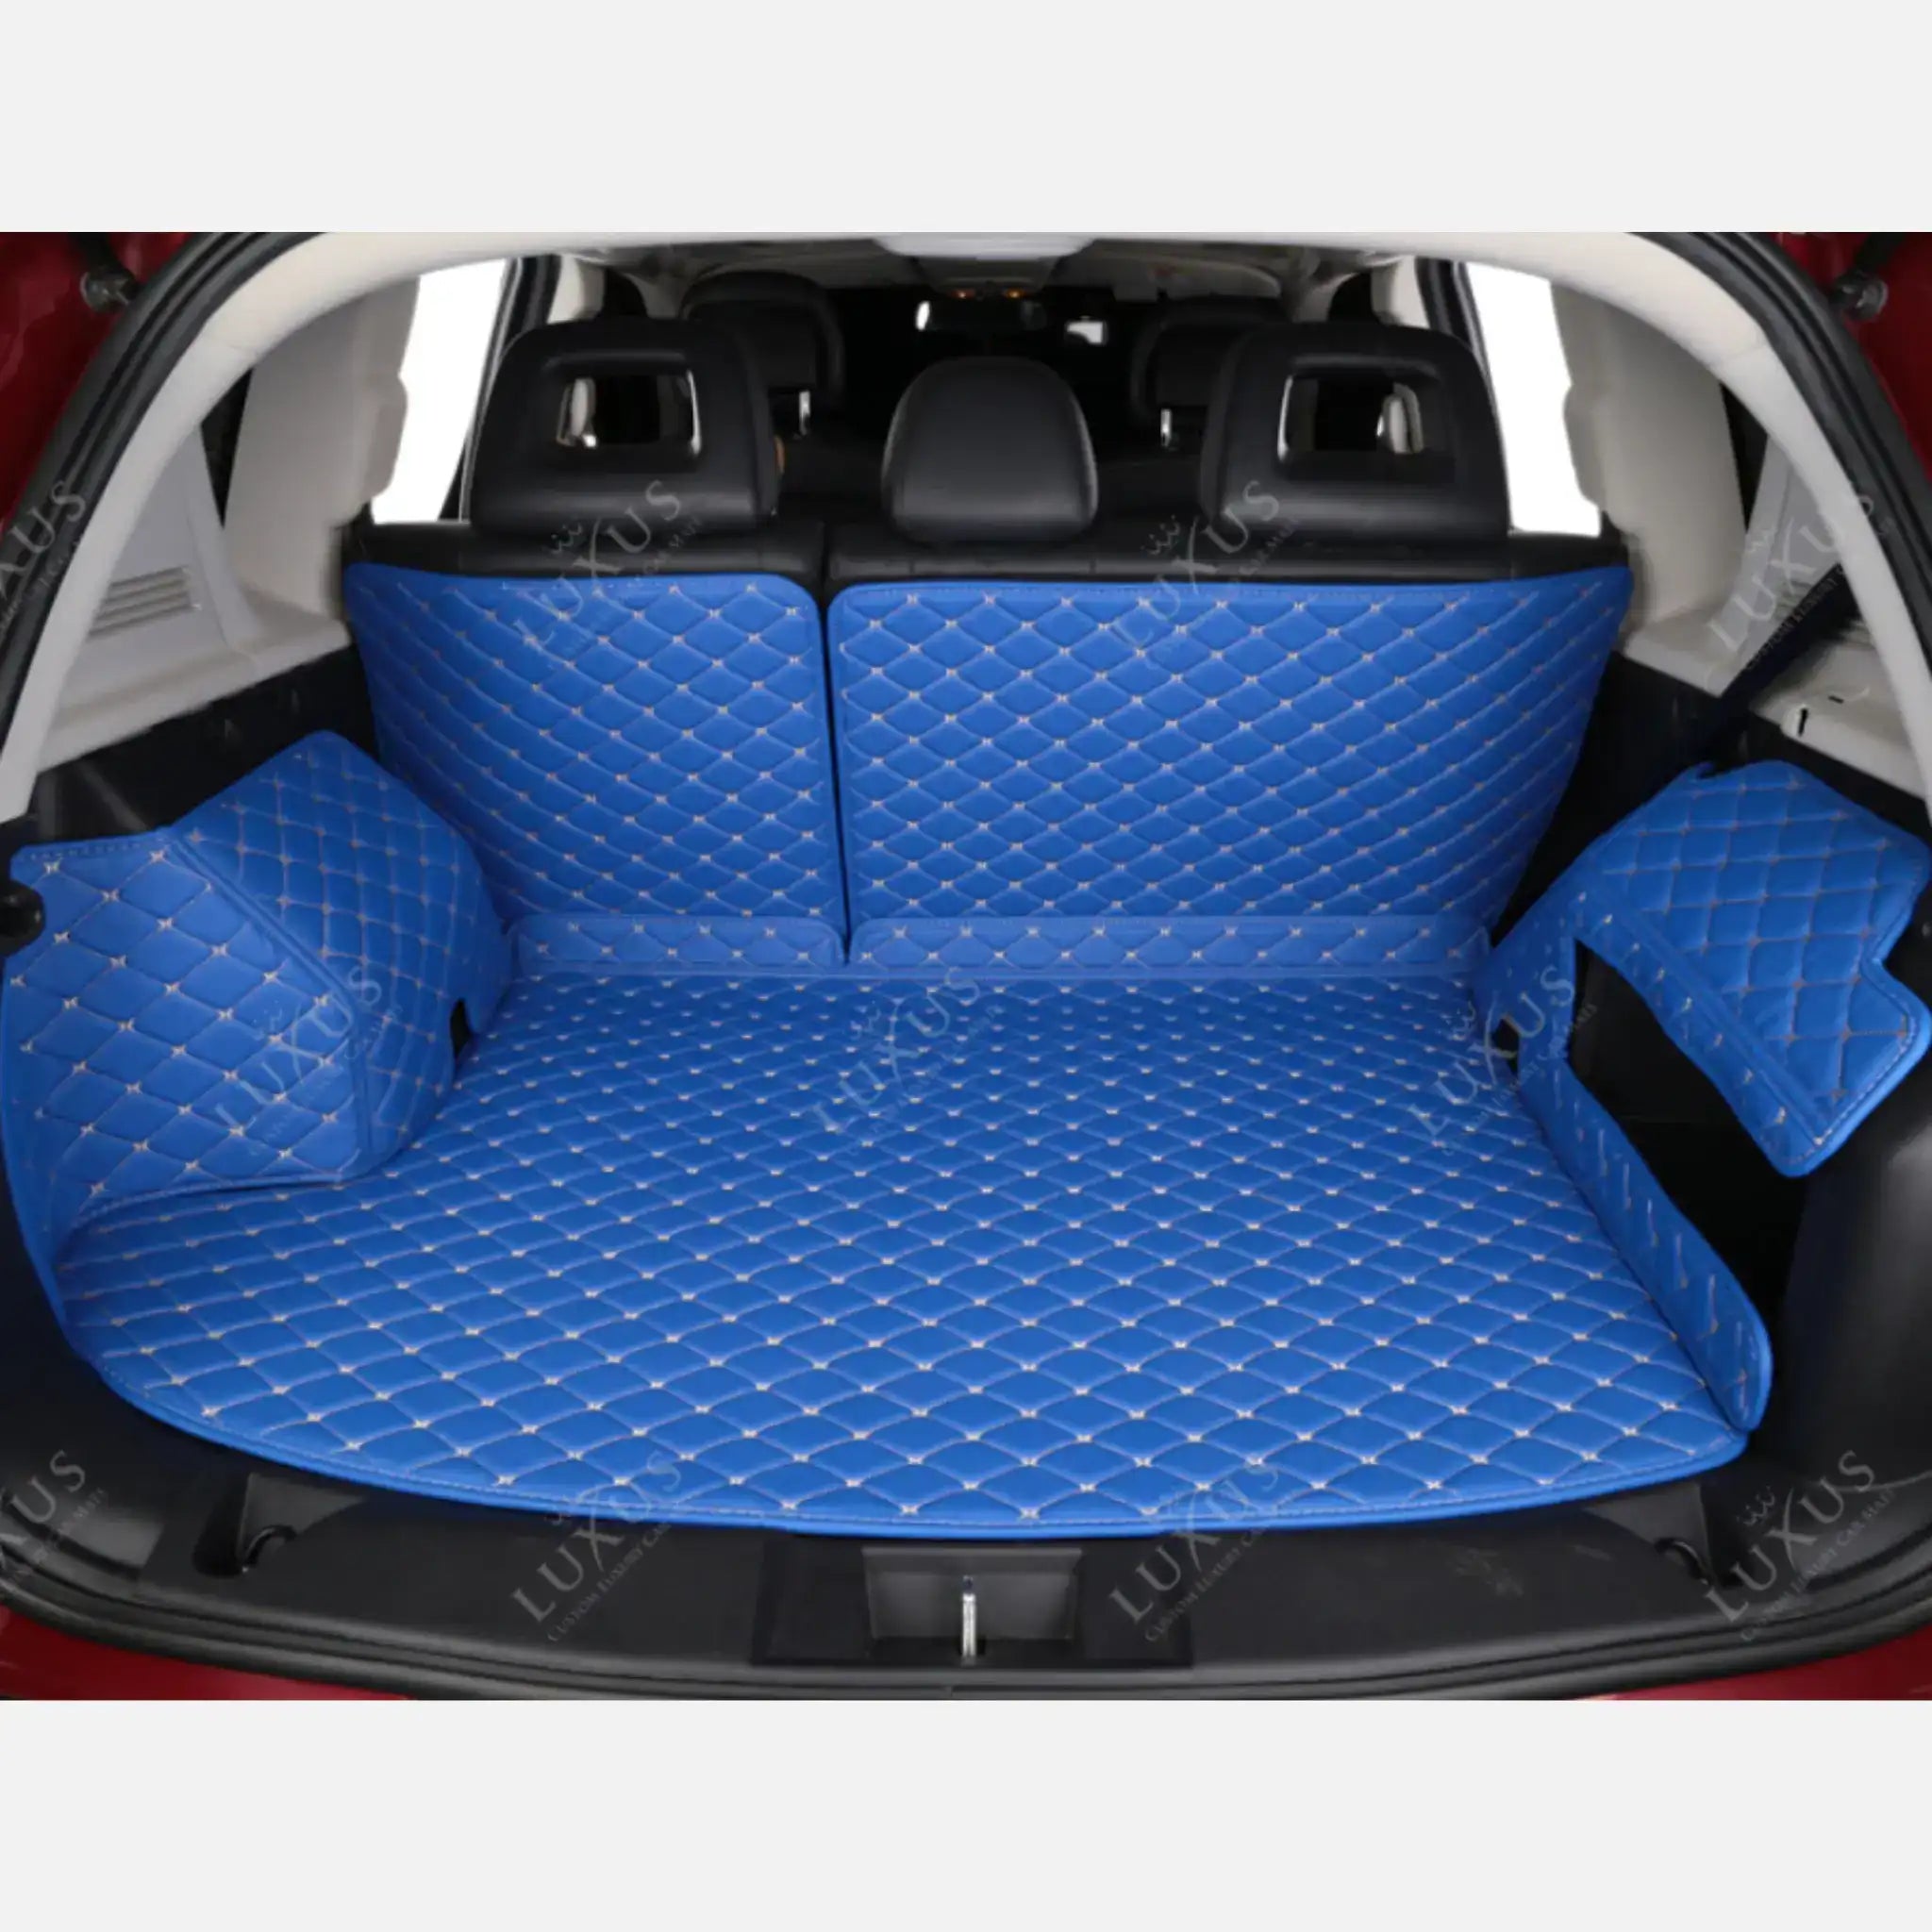 Trunk Mats For Car, Truck & SUV Luxus Car Mats Custom All-Weather  Waterproof Diamond Auto Boot Liner Carpets Rugs Blue